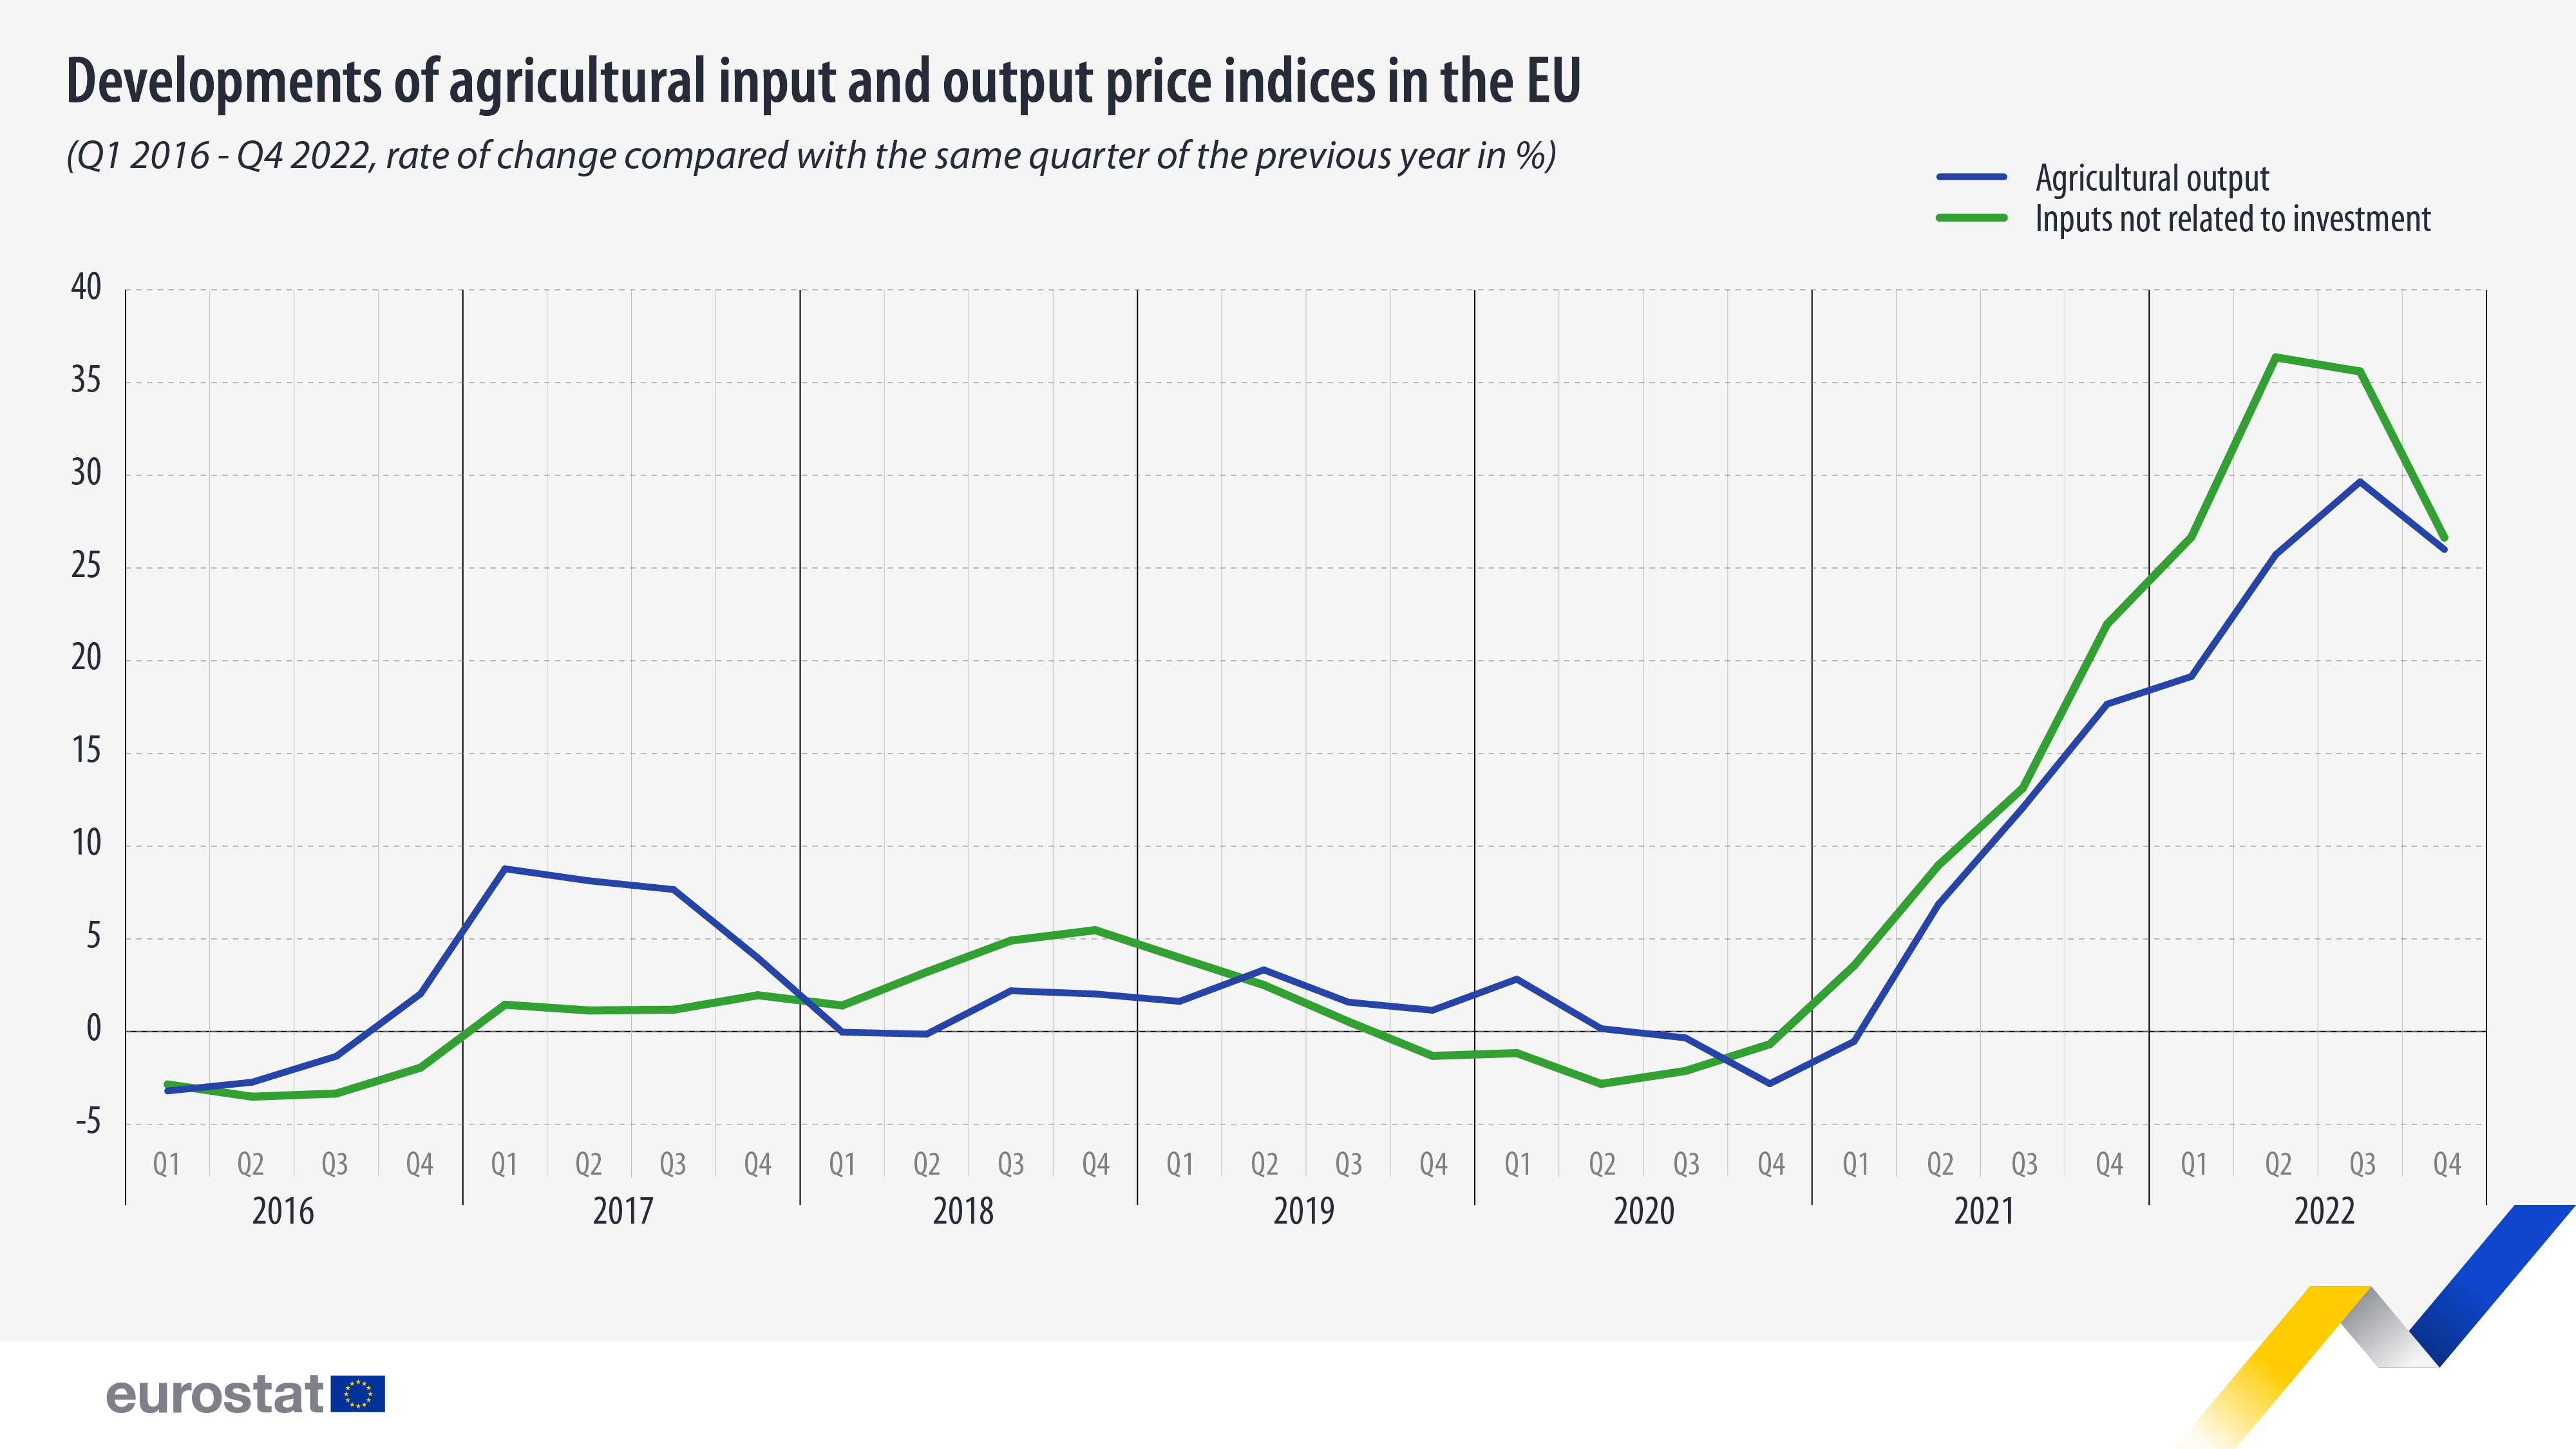 Bar chart: Developments of agricultural input and output price indices in the EU, Q1 2016-Q4 2022, rate of change compared with the same quarter of the previous year in %